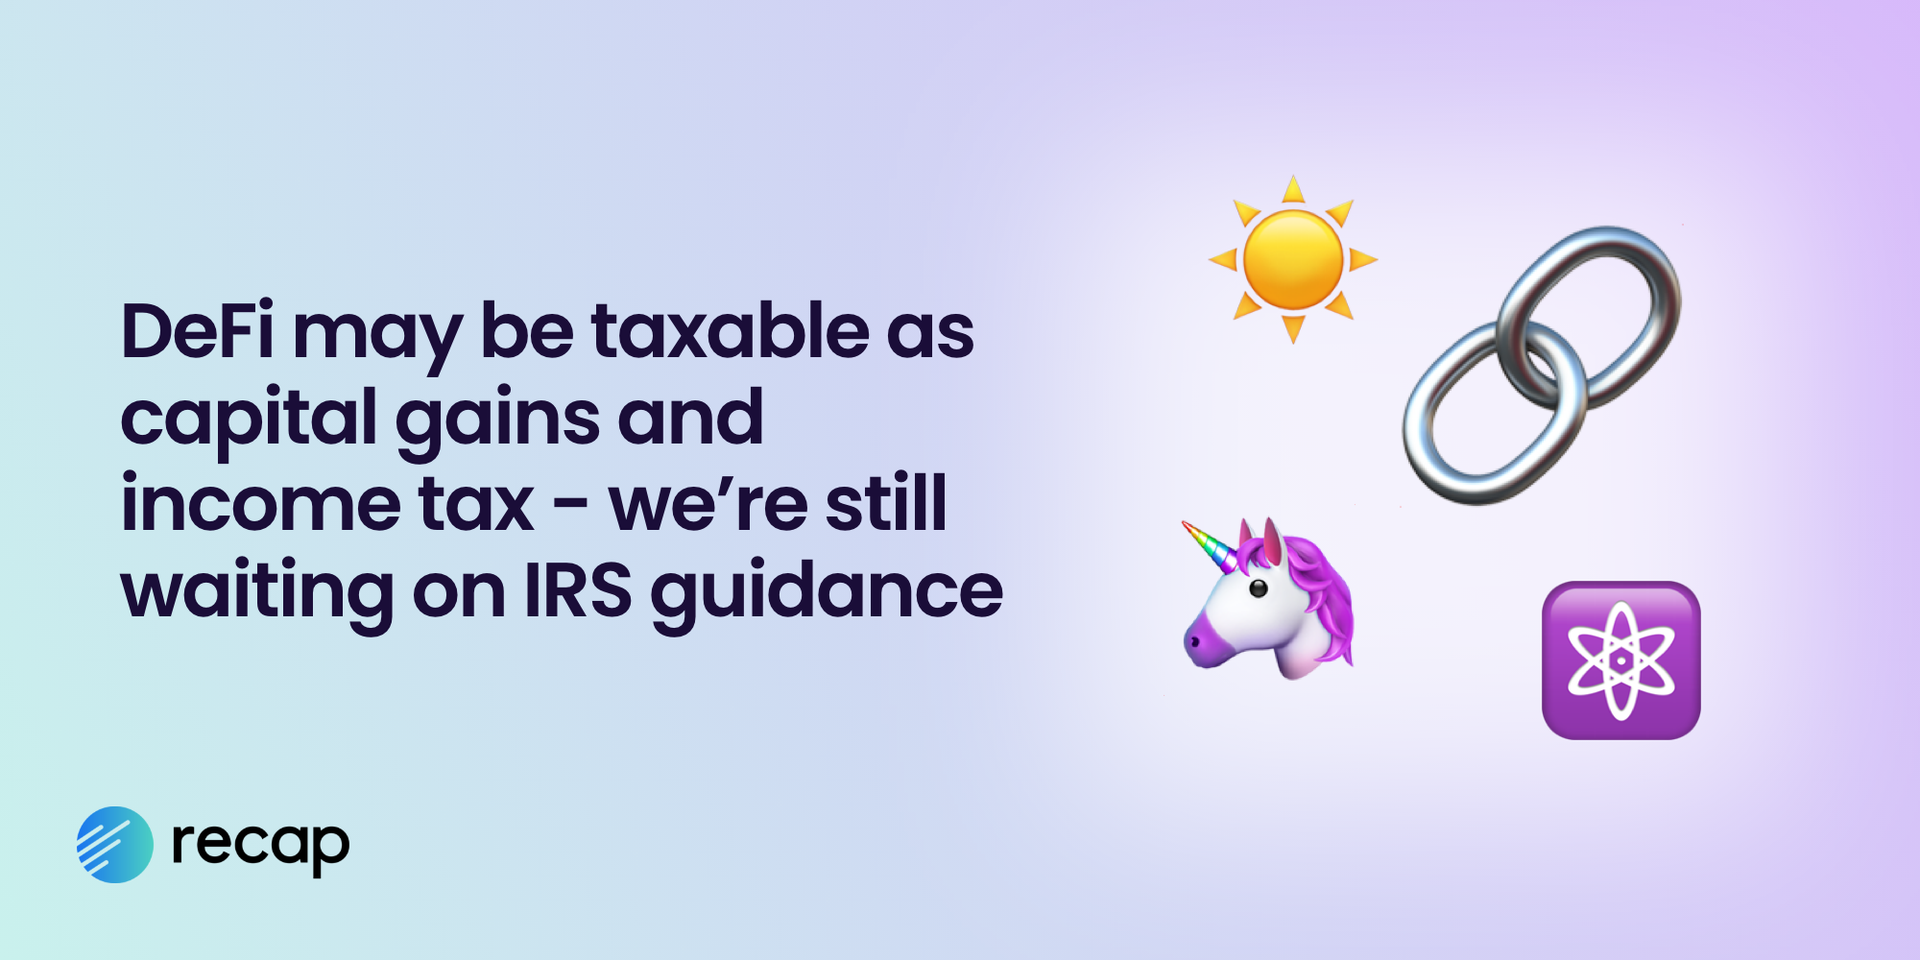 Infographic stating that DeFi may be taxable as capital gains or income tax - we're still waiting on IRS guidance